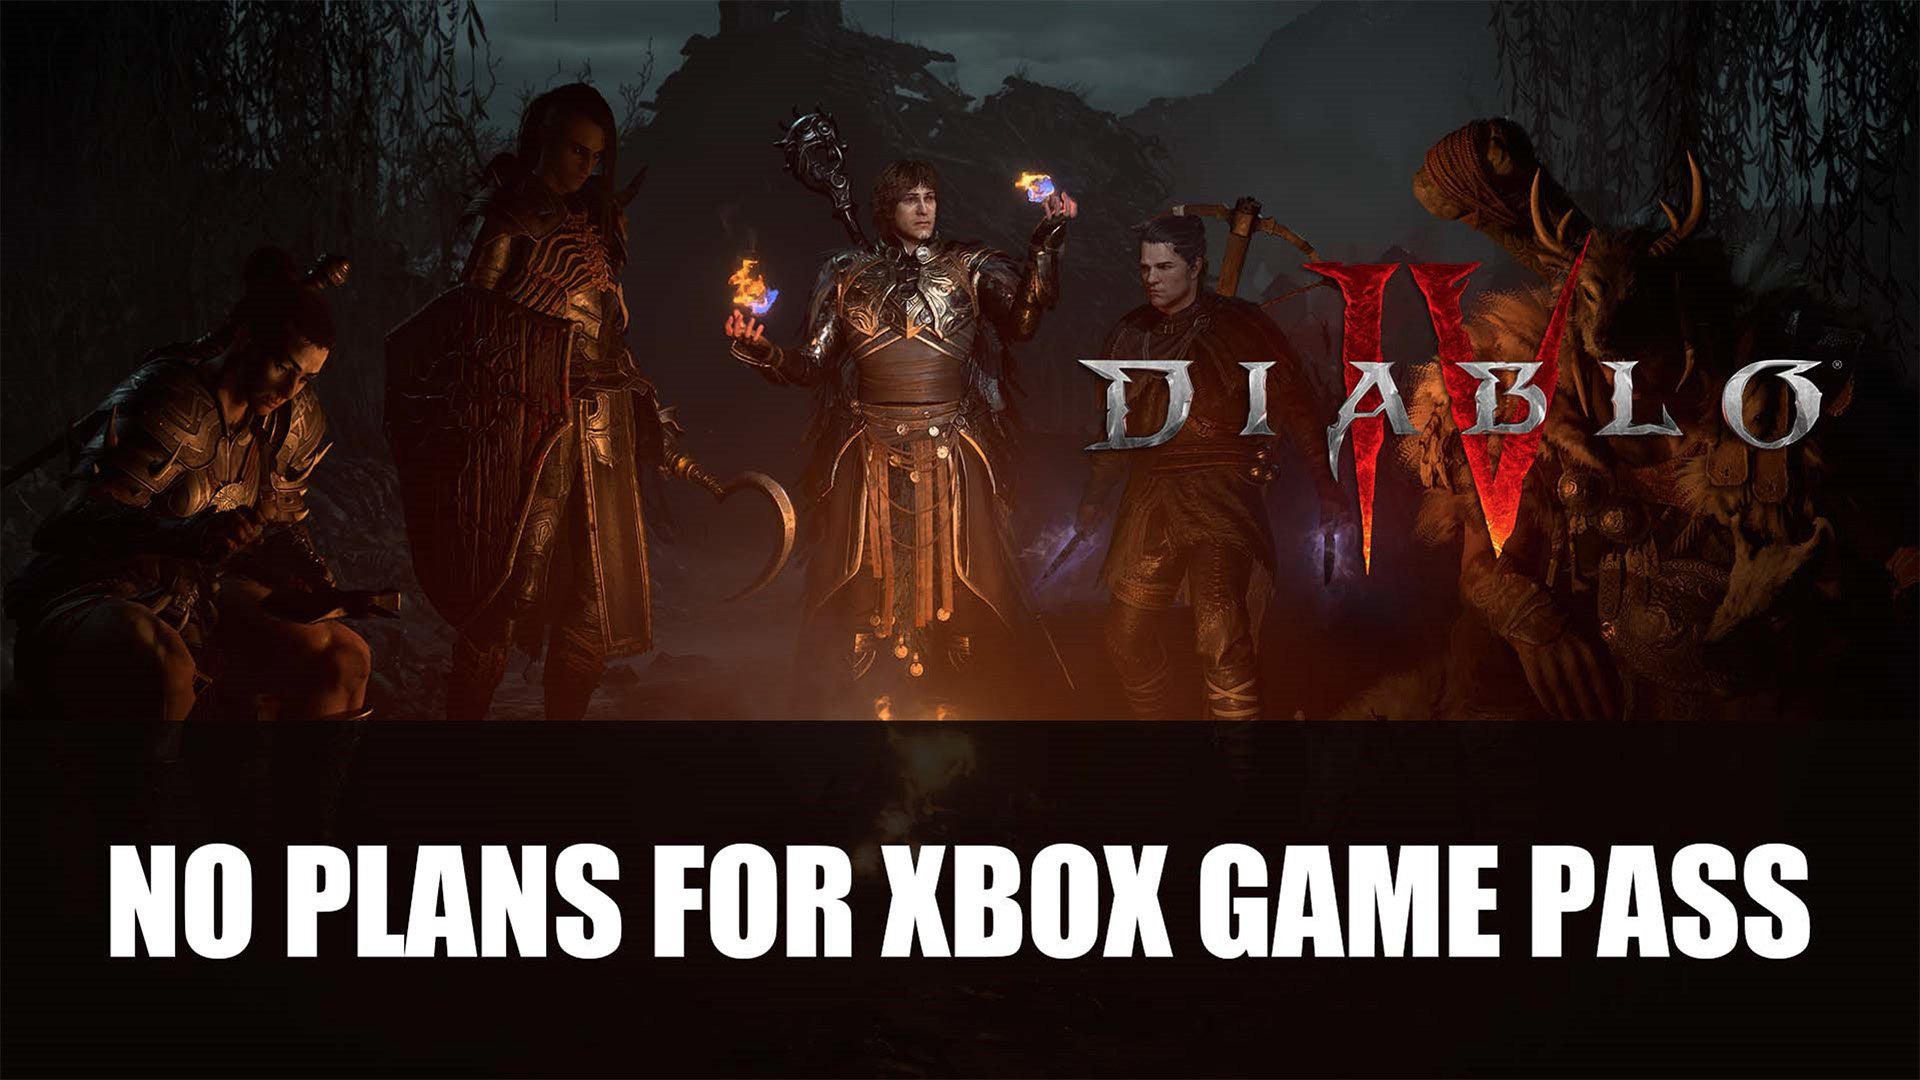 Diablo 4 Confirmed to Have No Plans for Xbox Game Pass - Fextralife